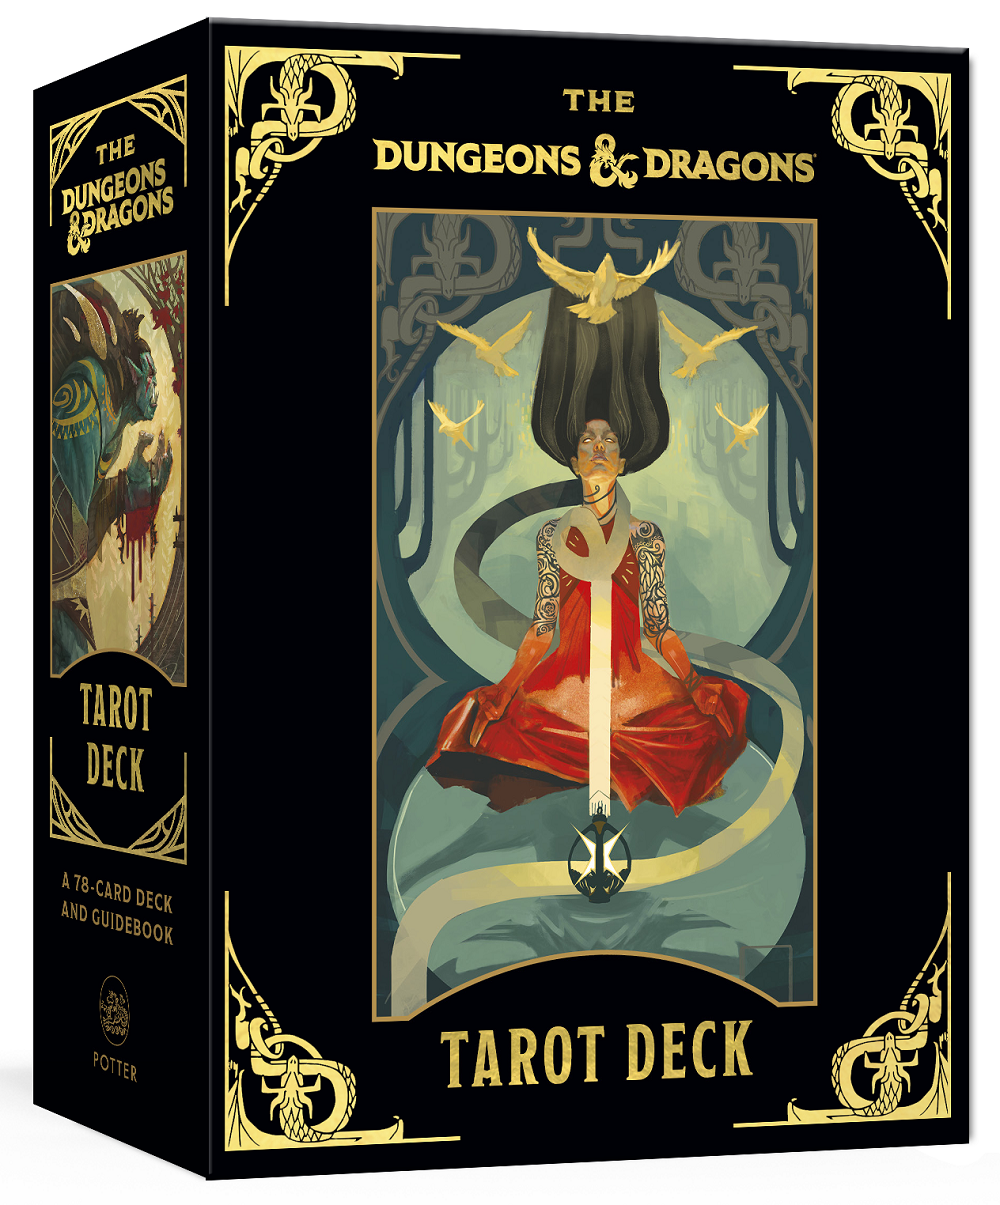 THE DUNGEONS AND DRAGONS TAROT DECK